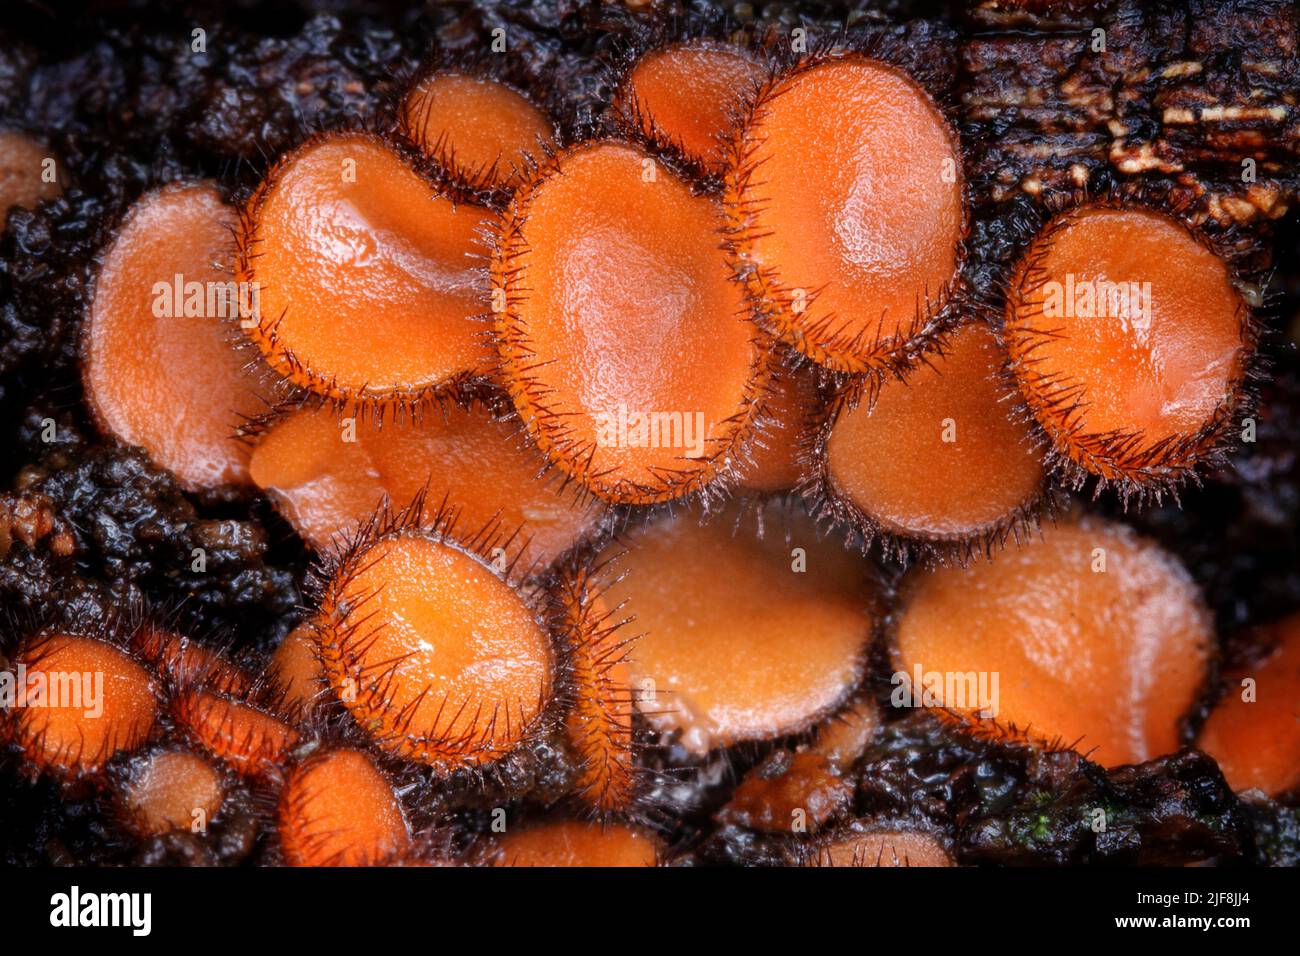 The Eyelash Fungus, which goes by the wonderful scientific name of Scutellinia scutellata, so named due to the eyelash-like hairs surrounding the cap. Stock Photo